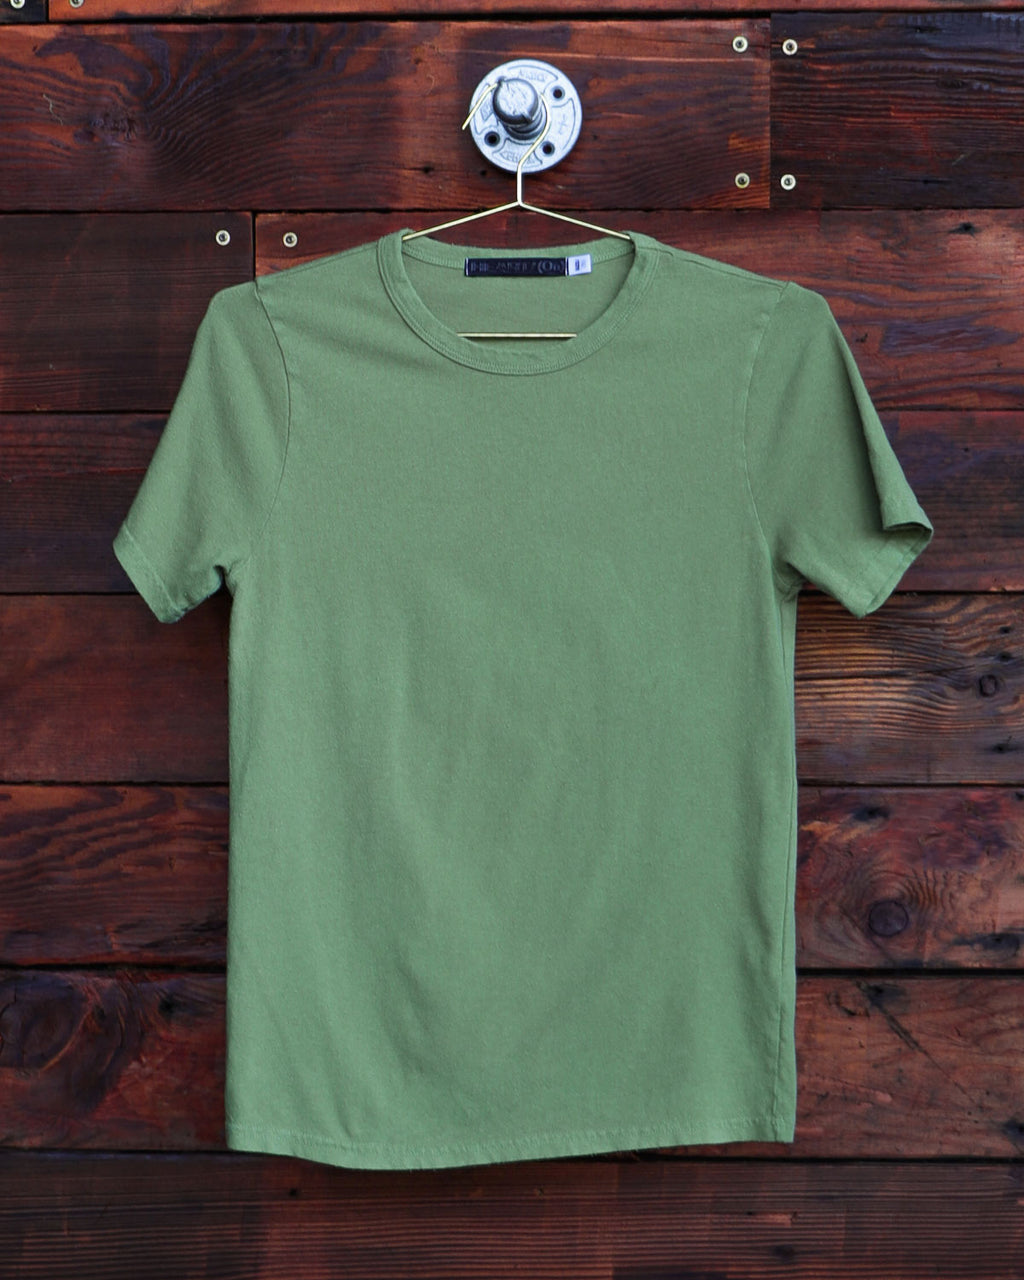 Essential green t-shirt hanging on wood wall